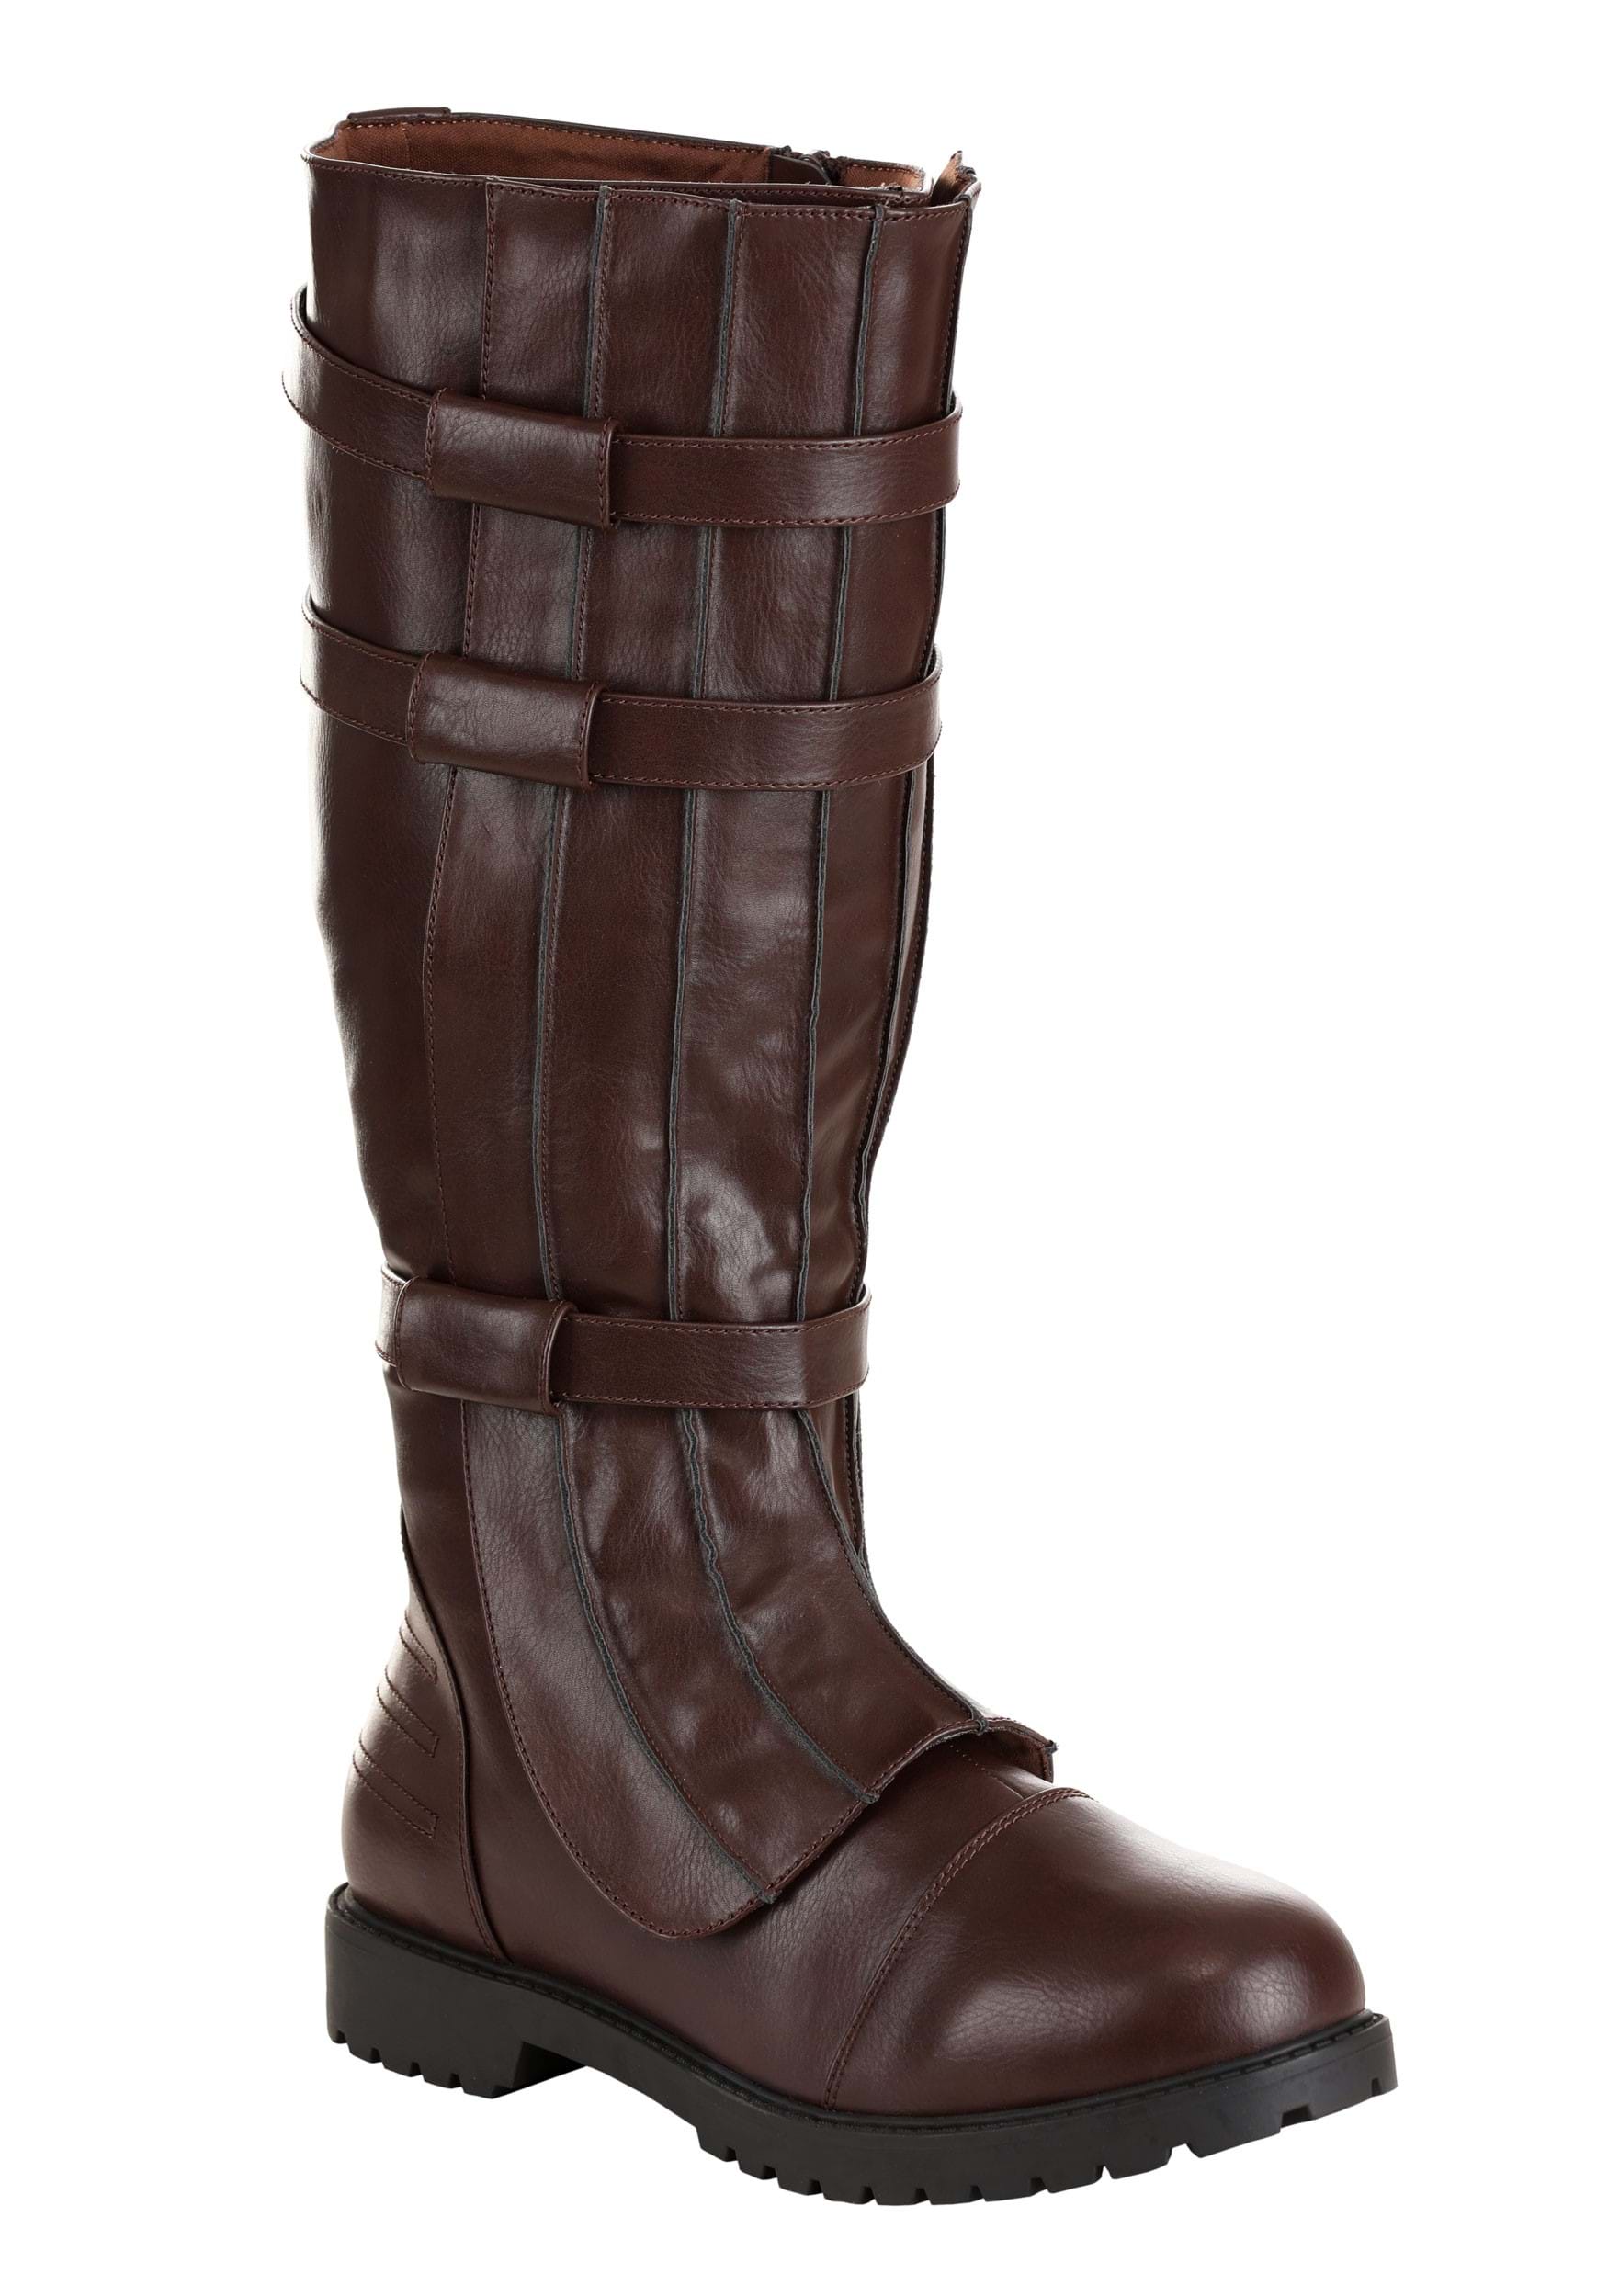 Image of Men's Brown Costume Boots ID FUN3409AD-12